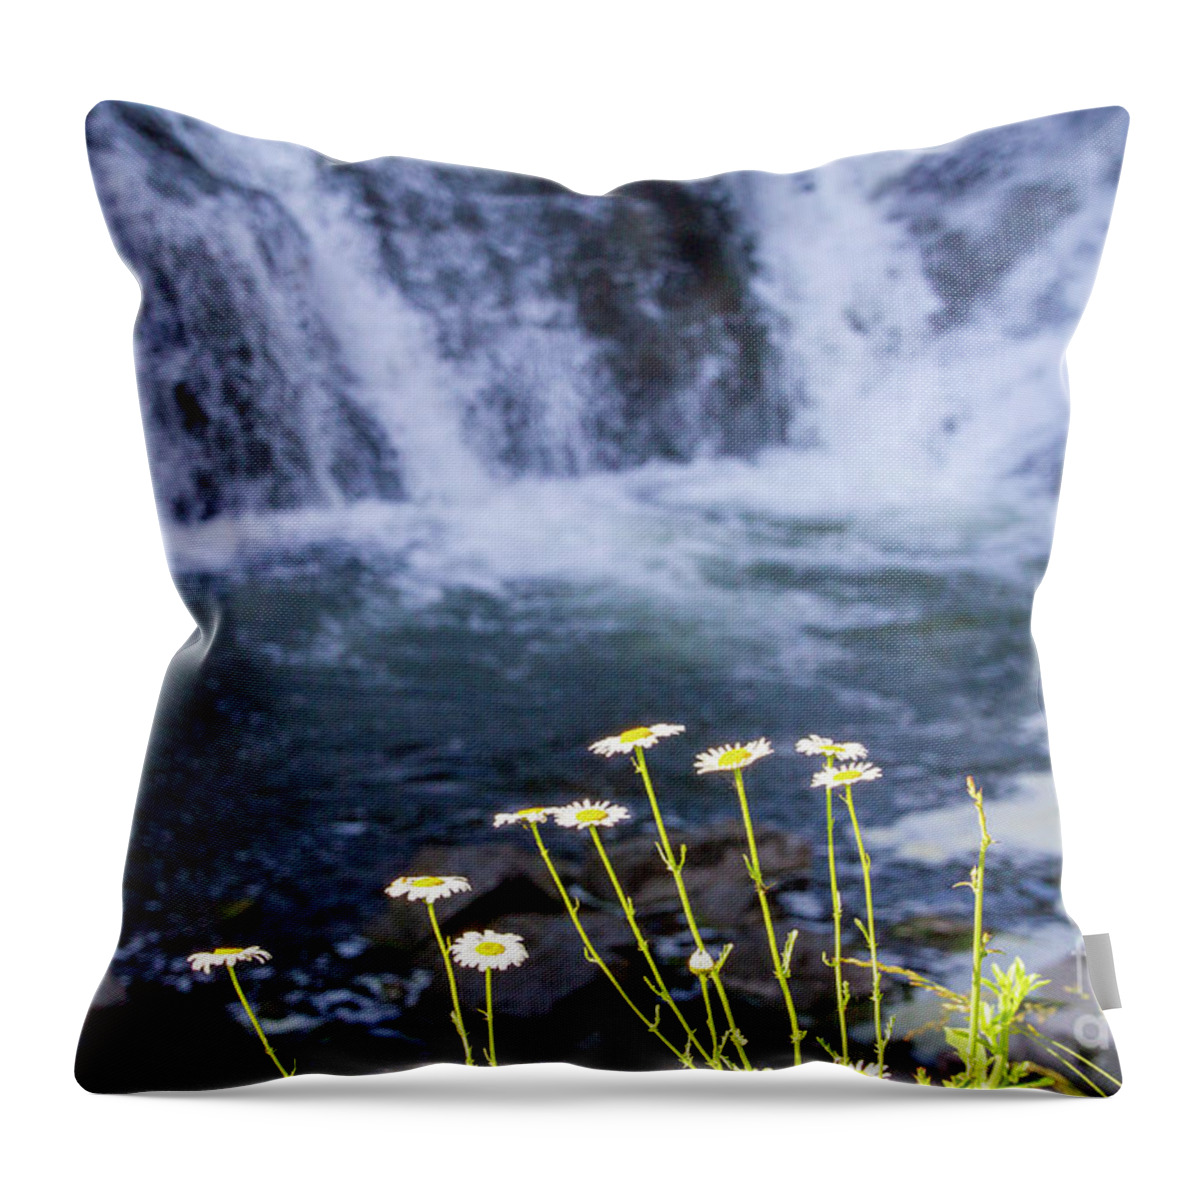 Waterfall Throw Pillow featuring the photograph Waterfall Daisies by William Norton